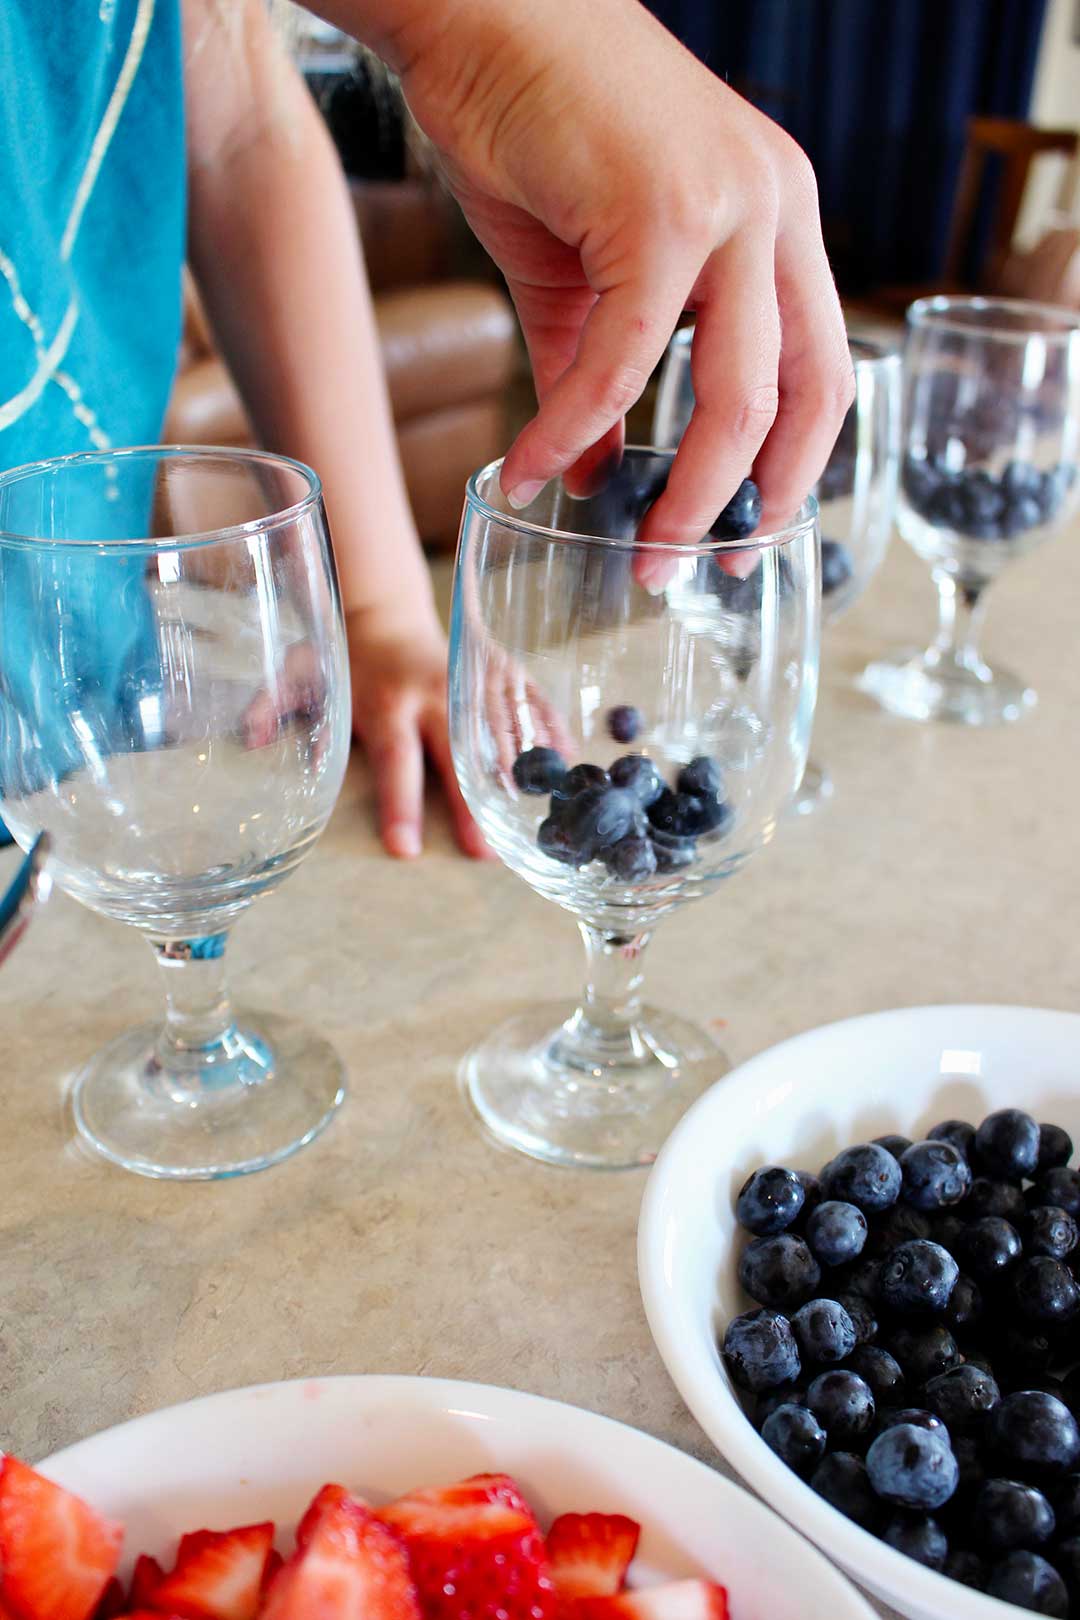 A child adding blueberries to a glass parfait cup.